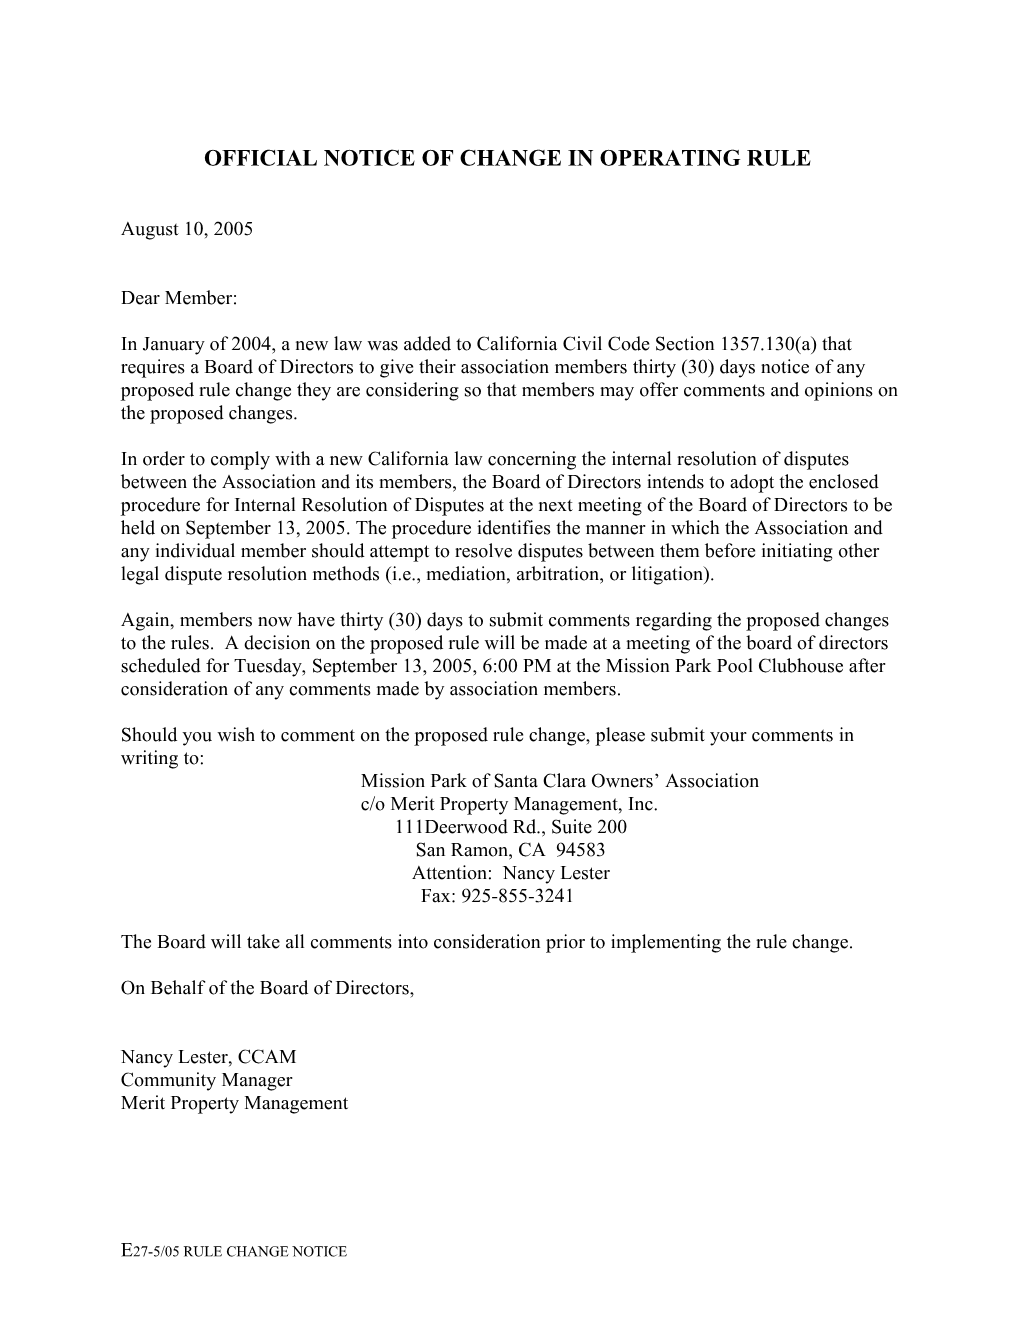 Official Notice of Operating Rule Change